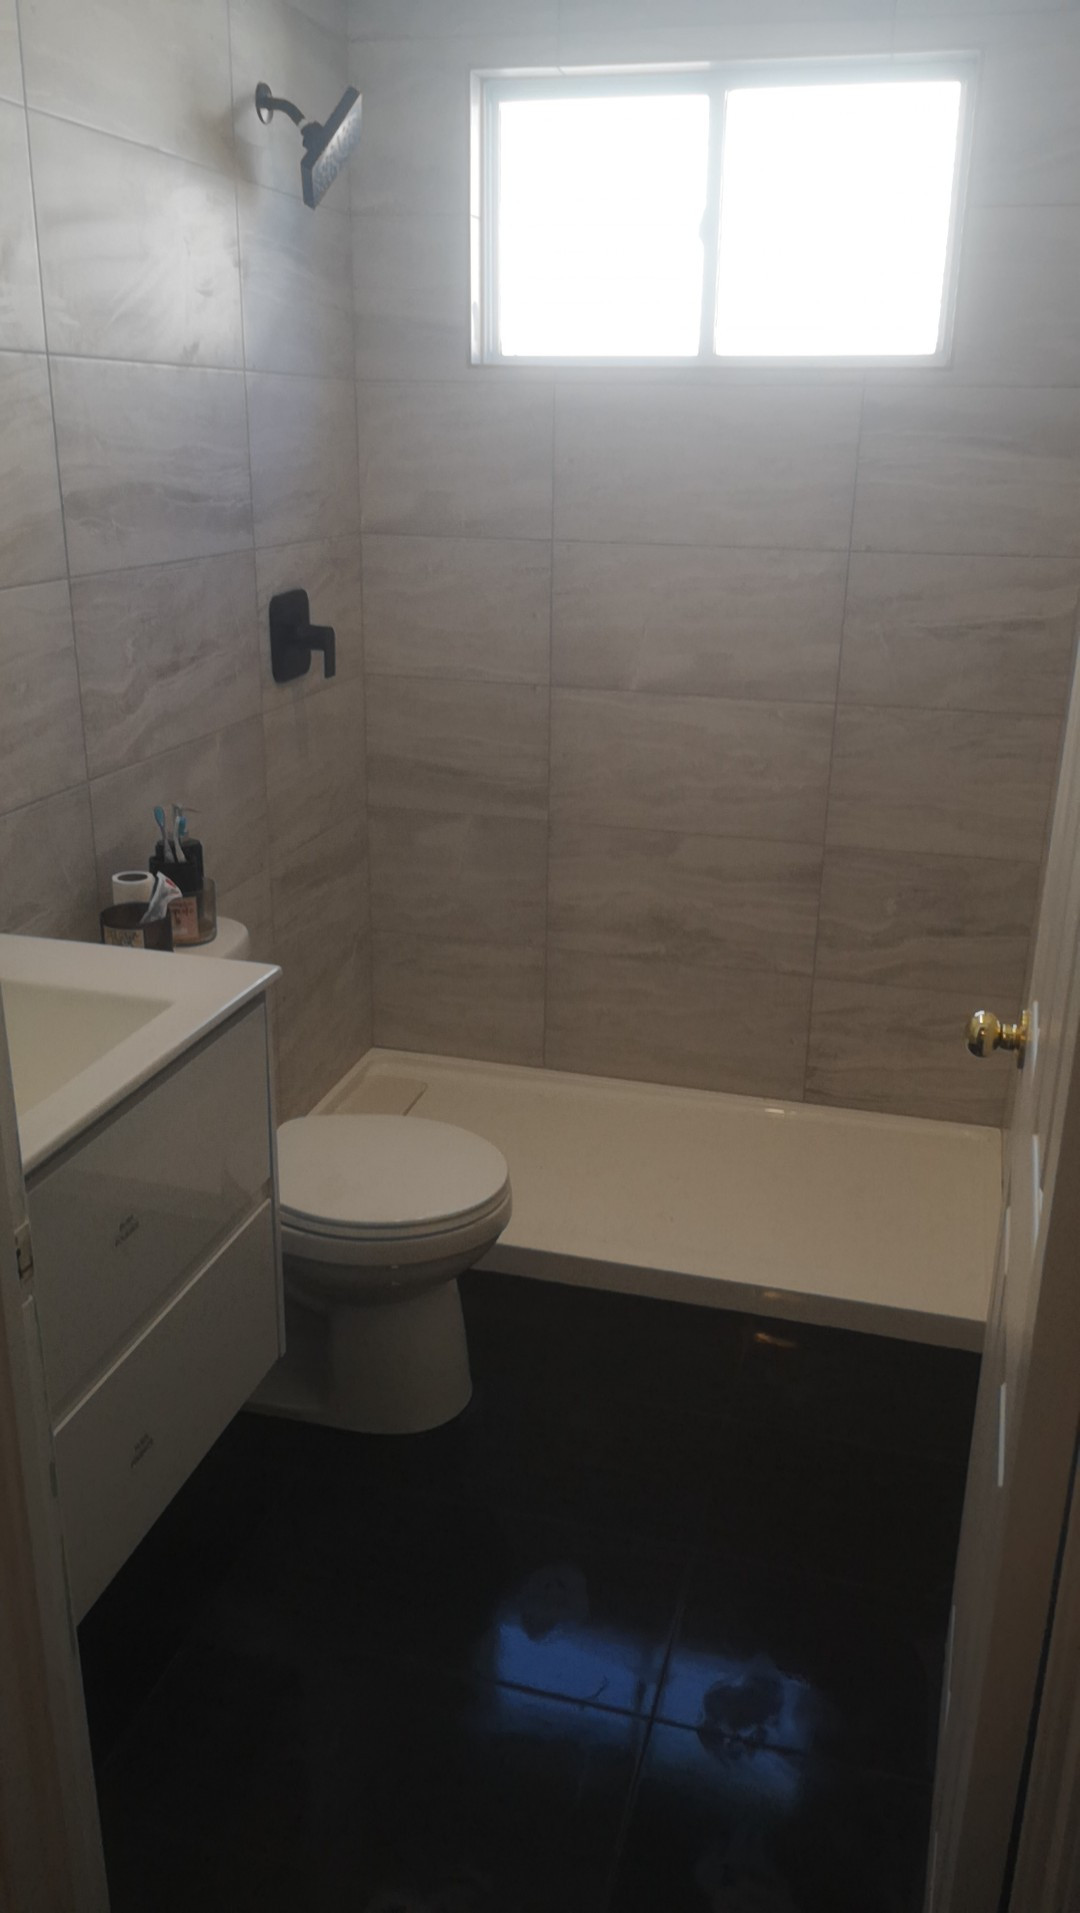 12X24 Tile In Small Bathroom
 Small bathroom I tiled recently Floor to ceiling 12x24